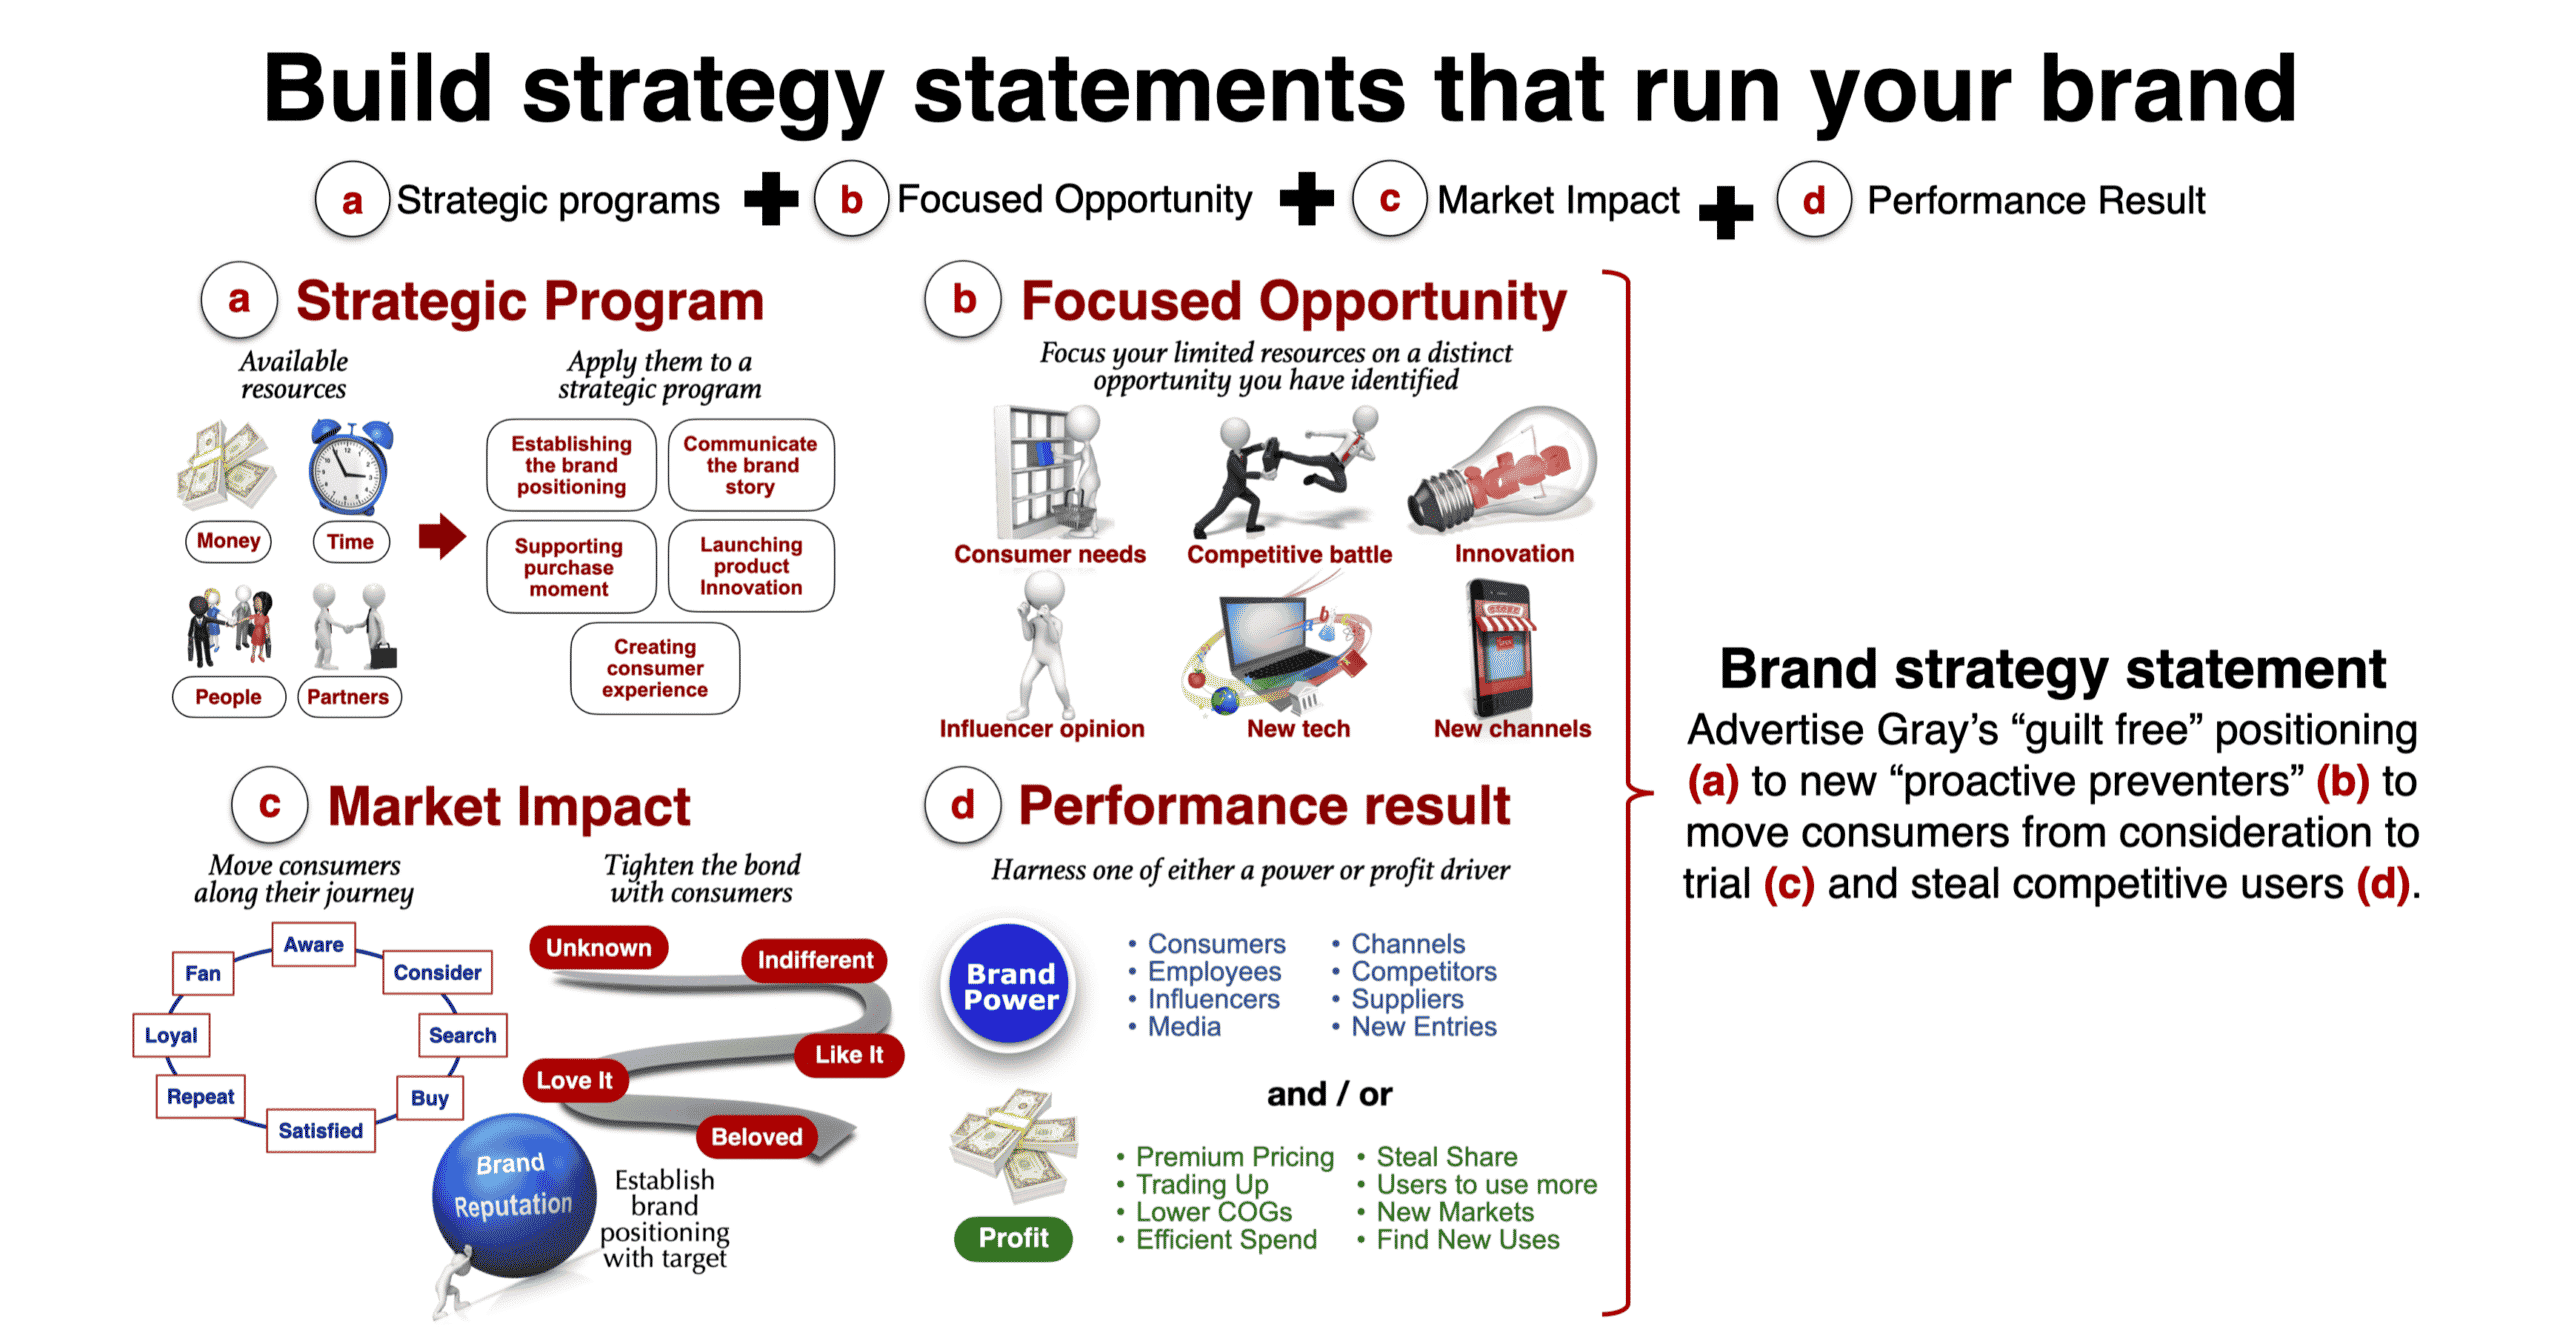 Building brand strategy statements